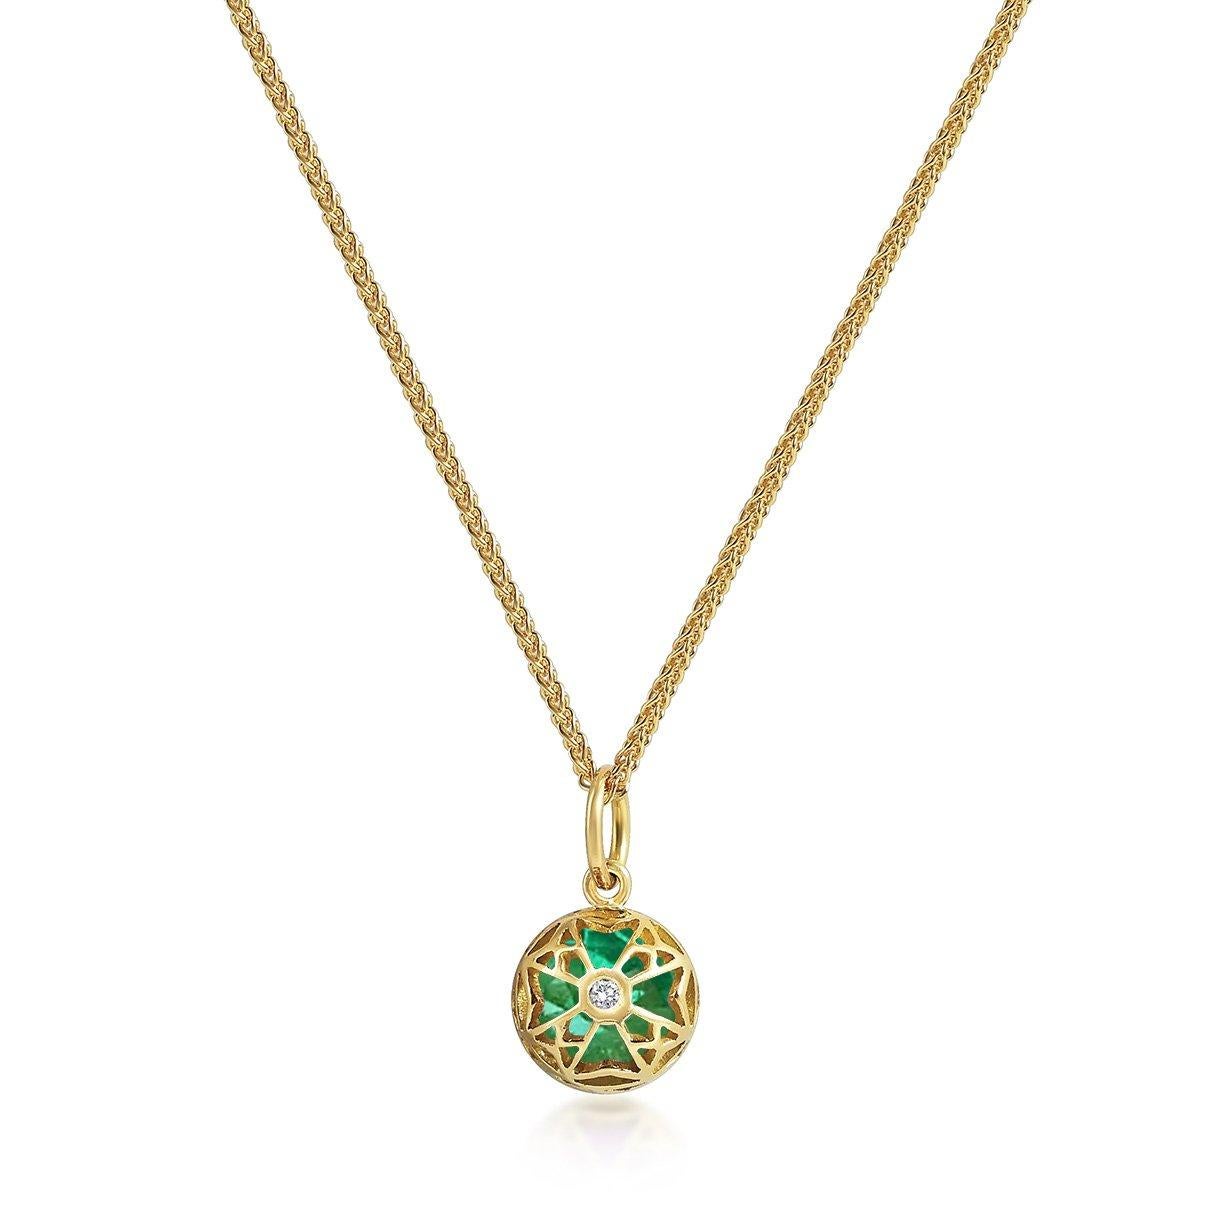 Handcrafted 1.00 Carat Emerald 18 Karat Yellow Gold Pendant Necklace. The 7mm natural stone is set in our iconic hand pierced gold lace to let the light through. Our pendants are the ideal gift. 

Here presented on our finely knitted gold chains.